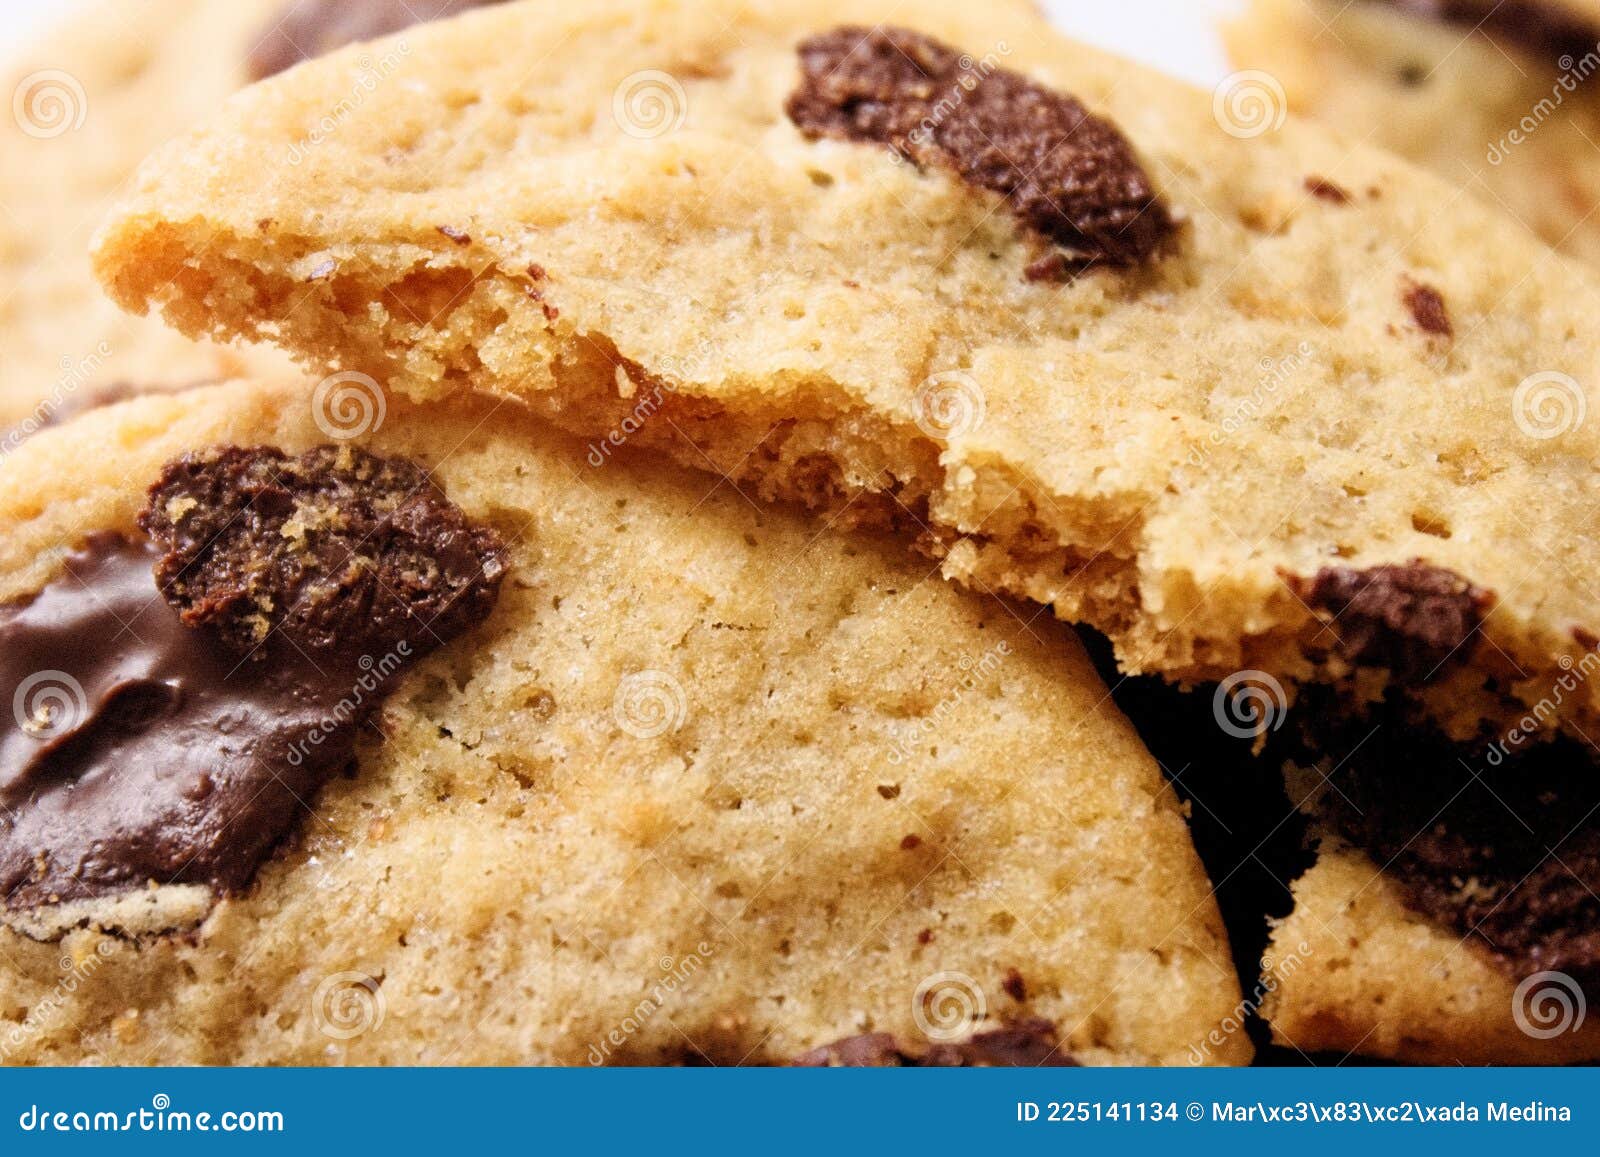 delicious, cruncky and sweet choco chip golden cookies